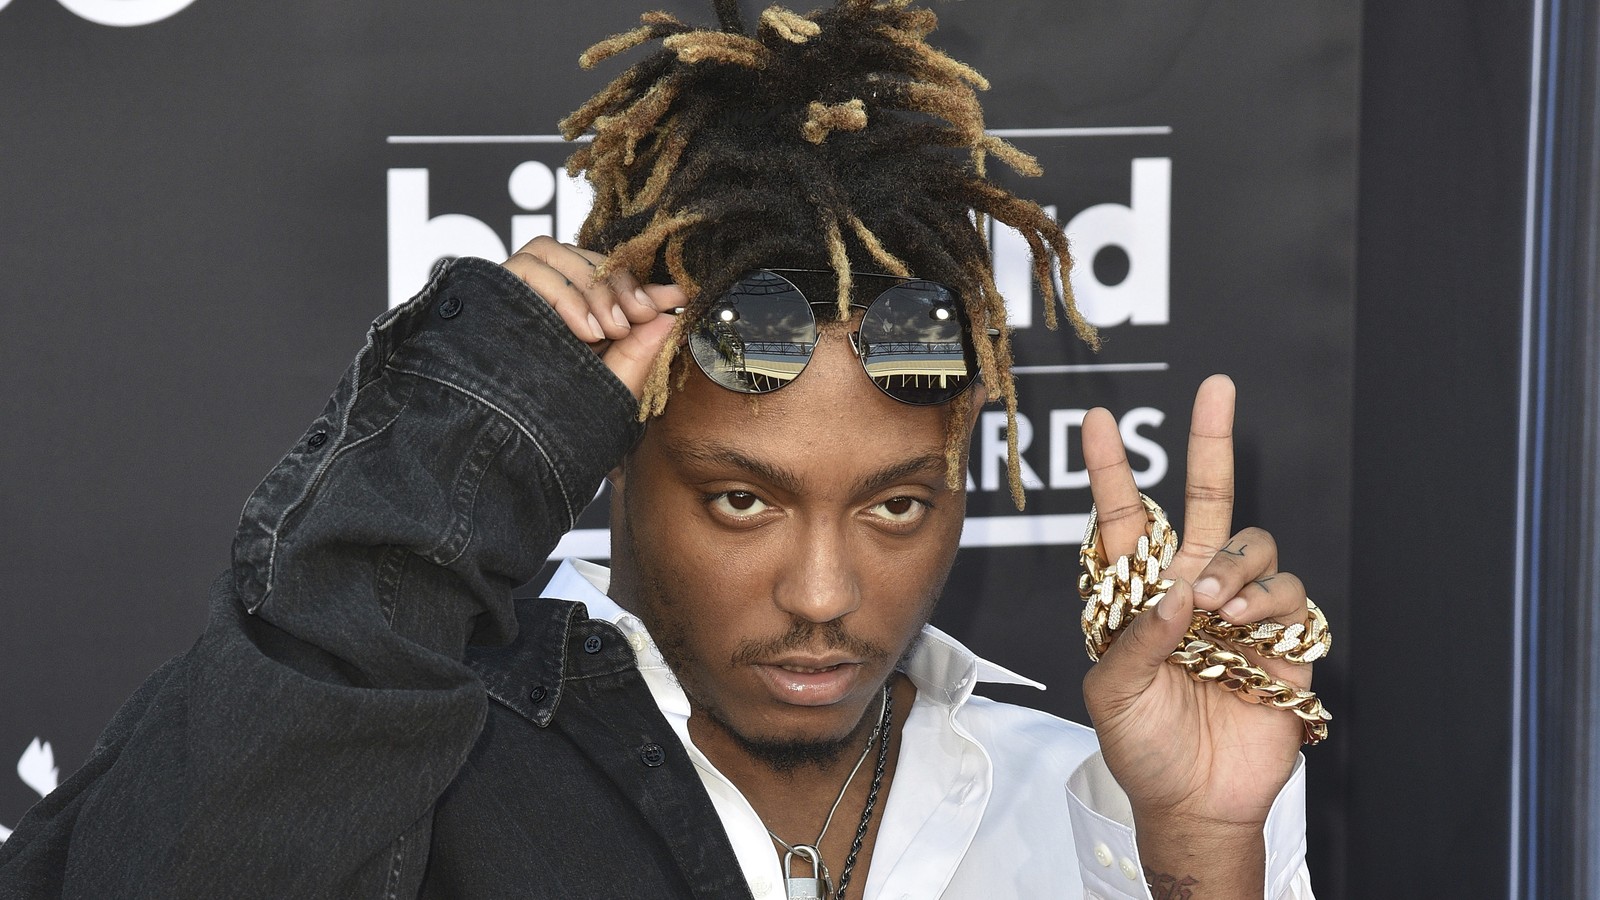 Reports: Chicago rapper Juice WRLD dies after suffering seizure at